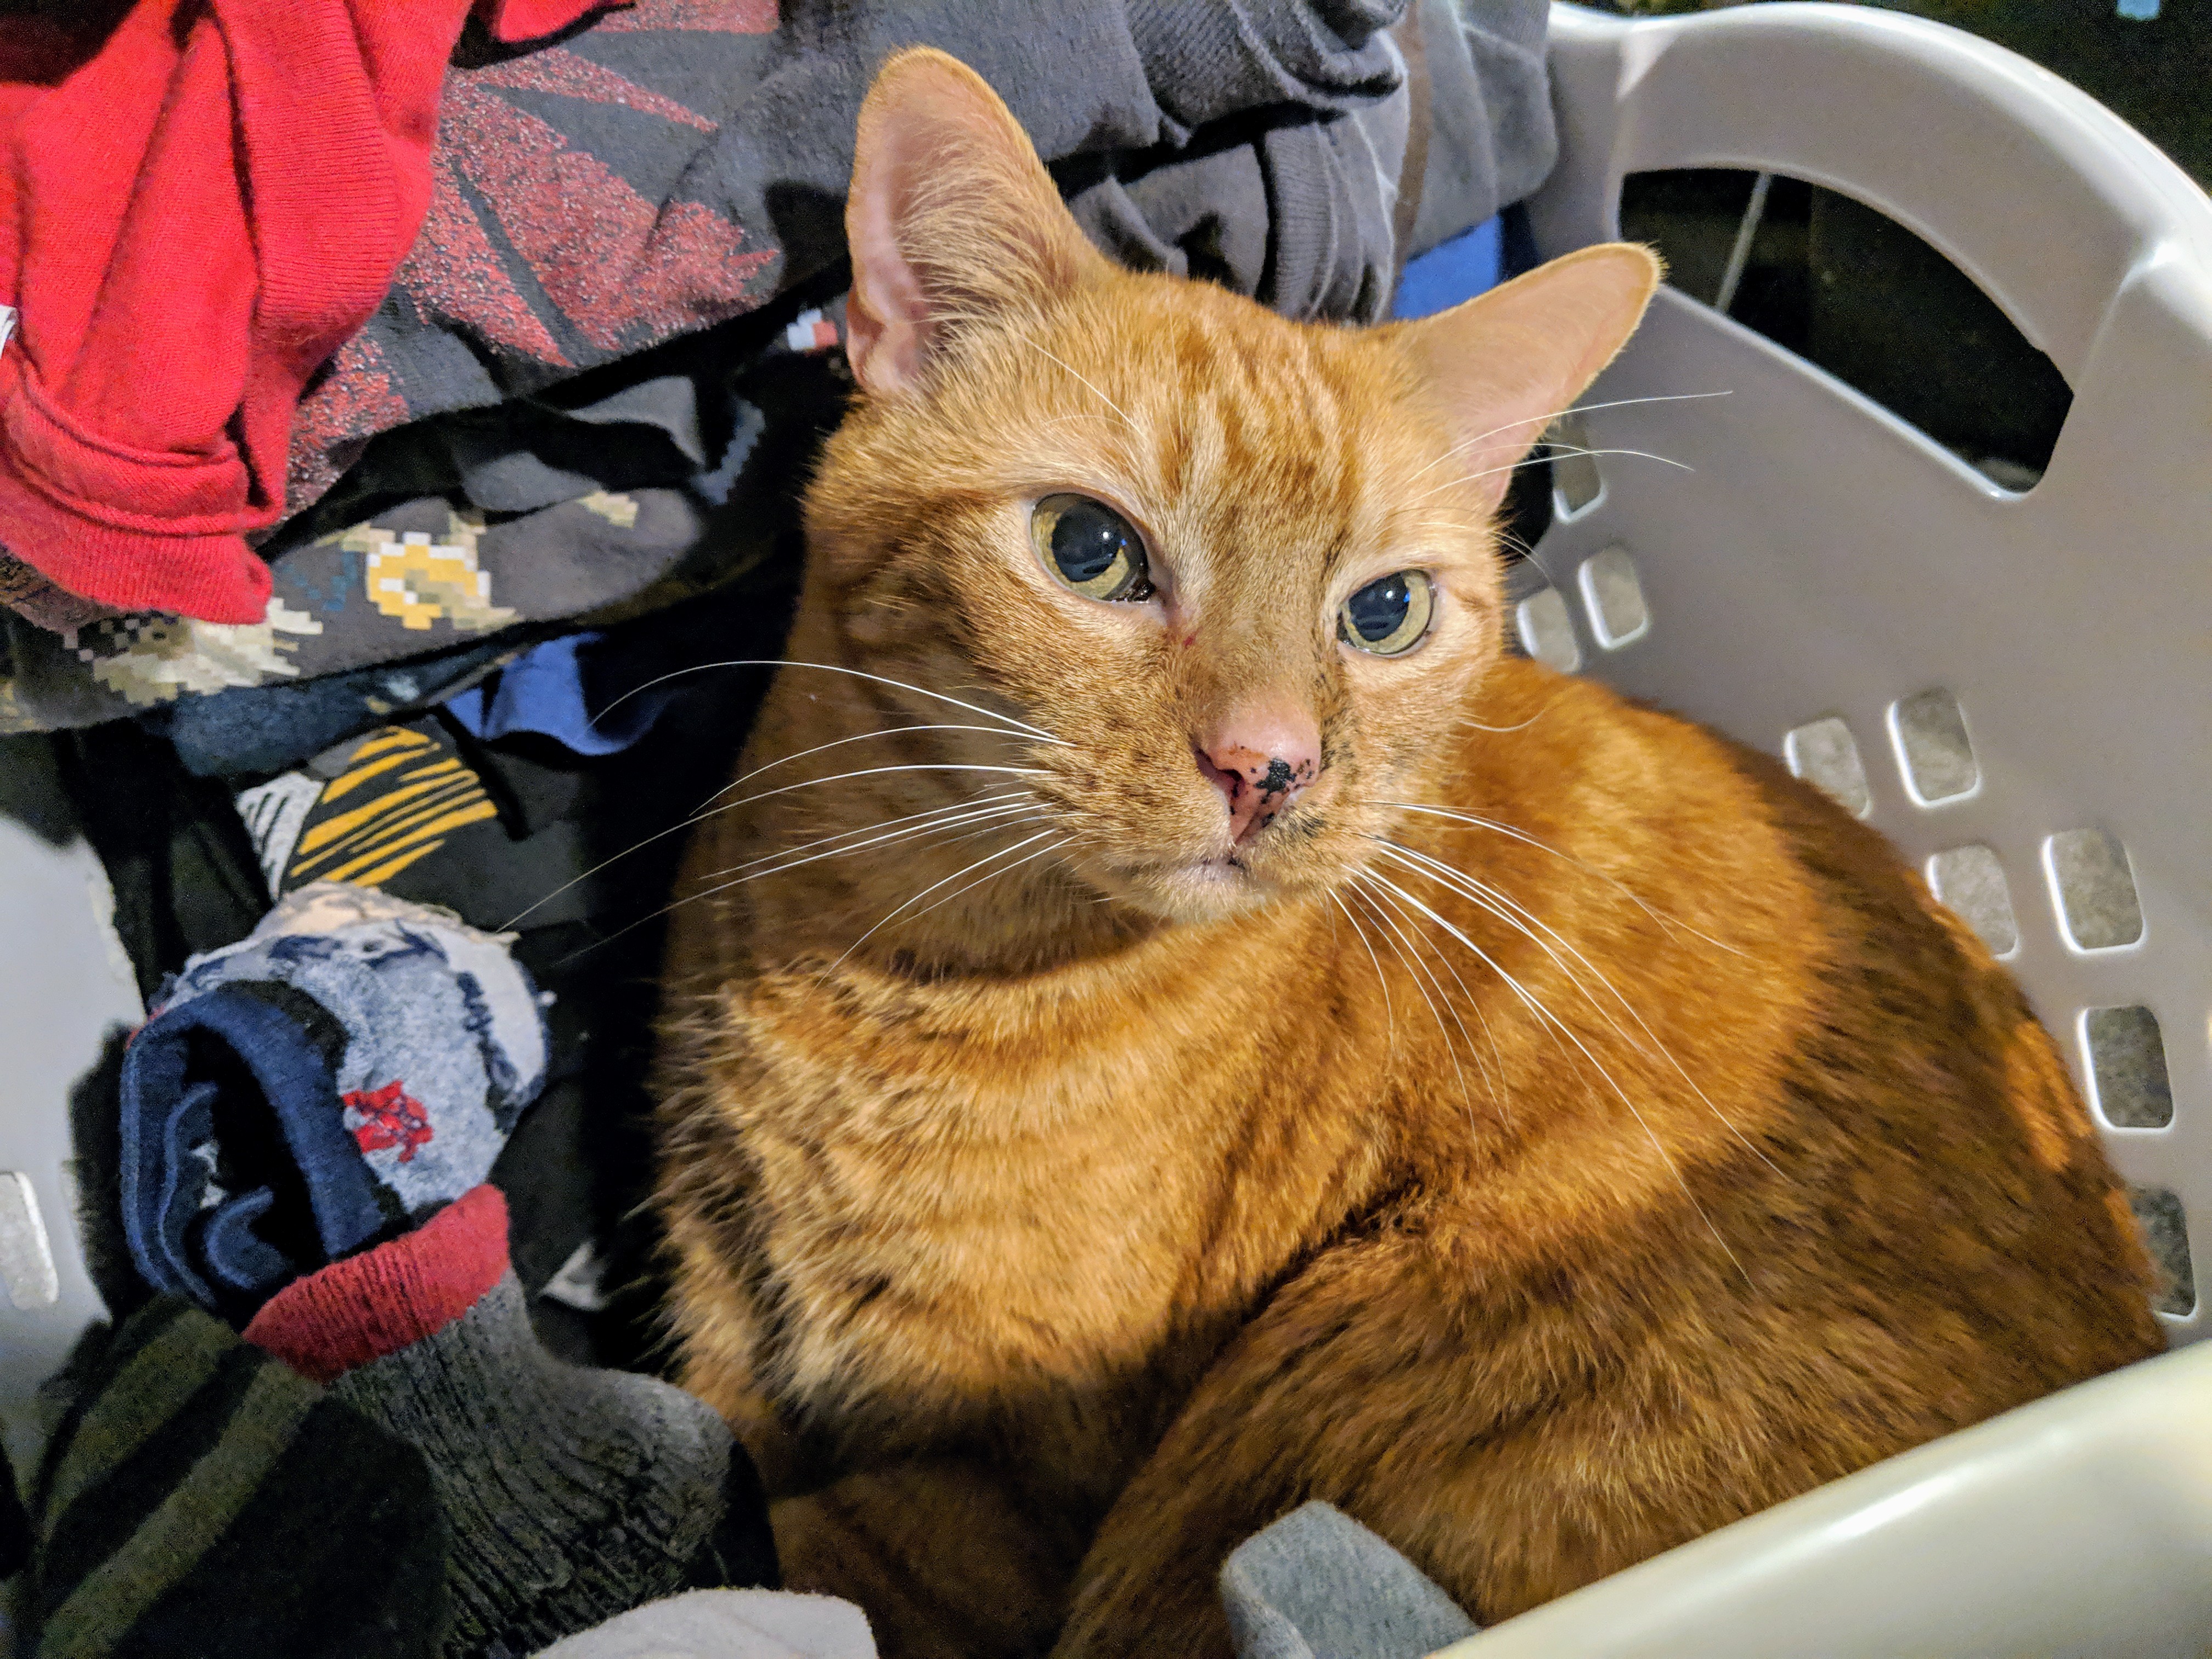 Riley making a bed out of the laundry